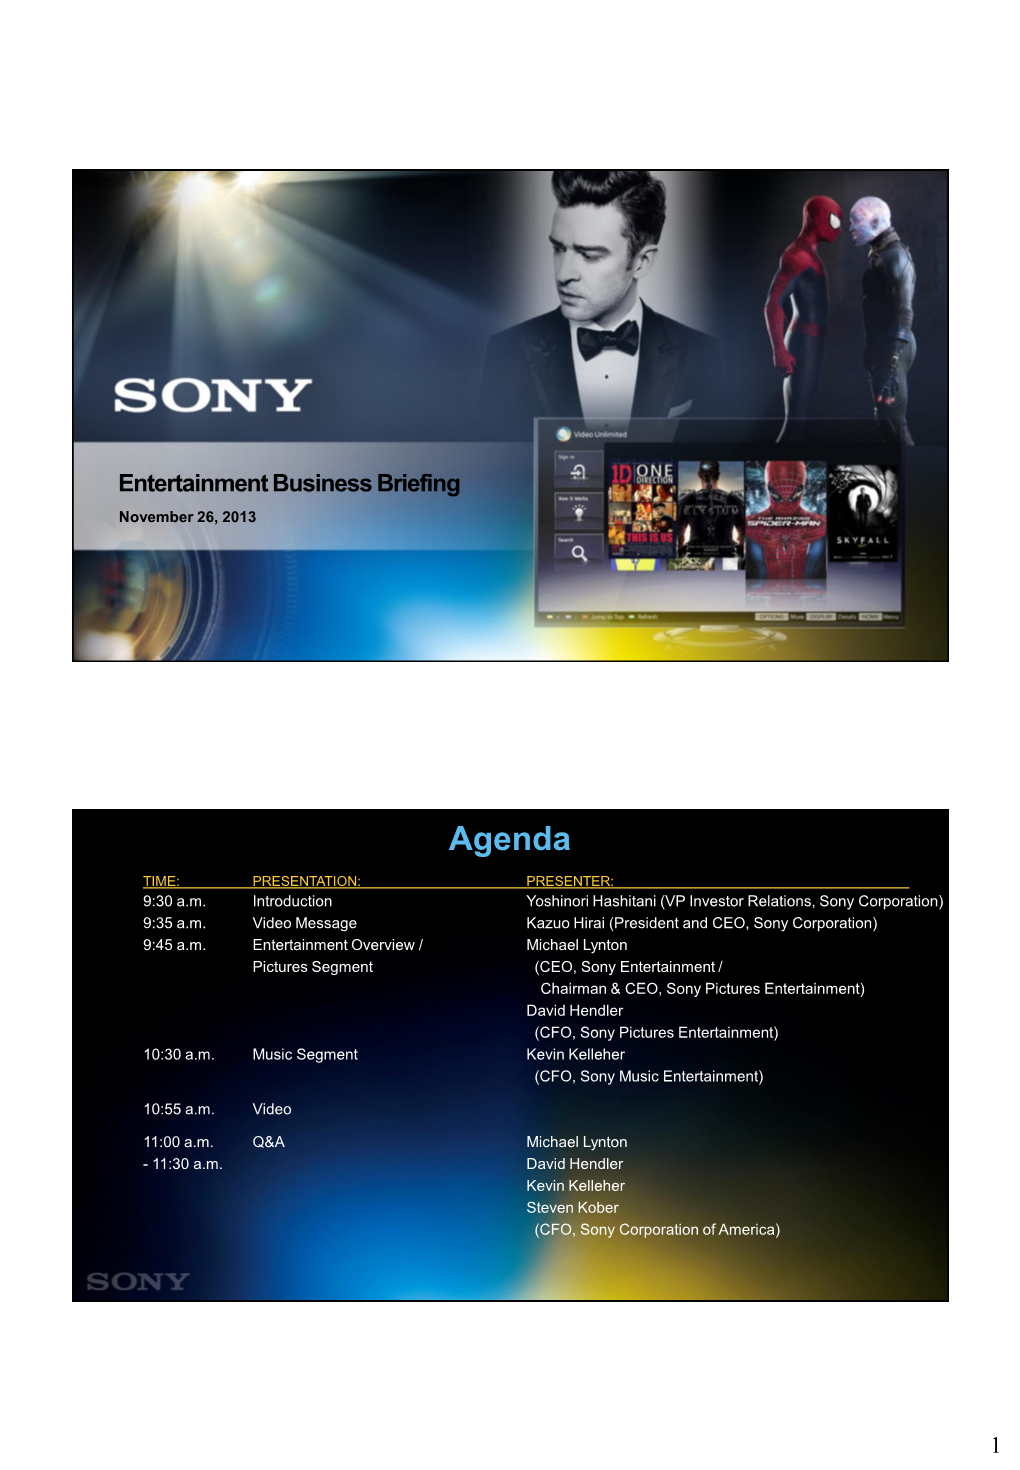 Entertainment Business Briefing November 26, 2013